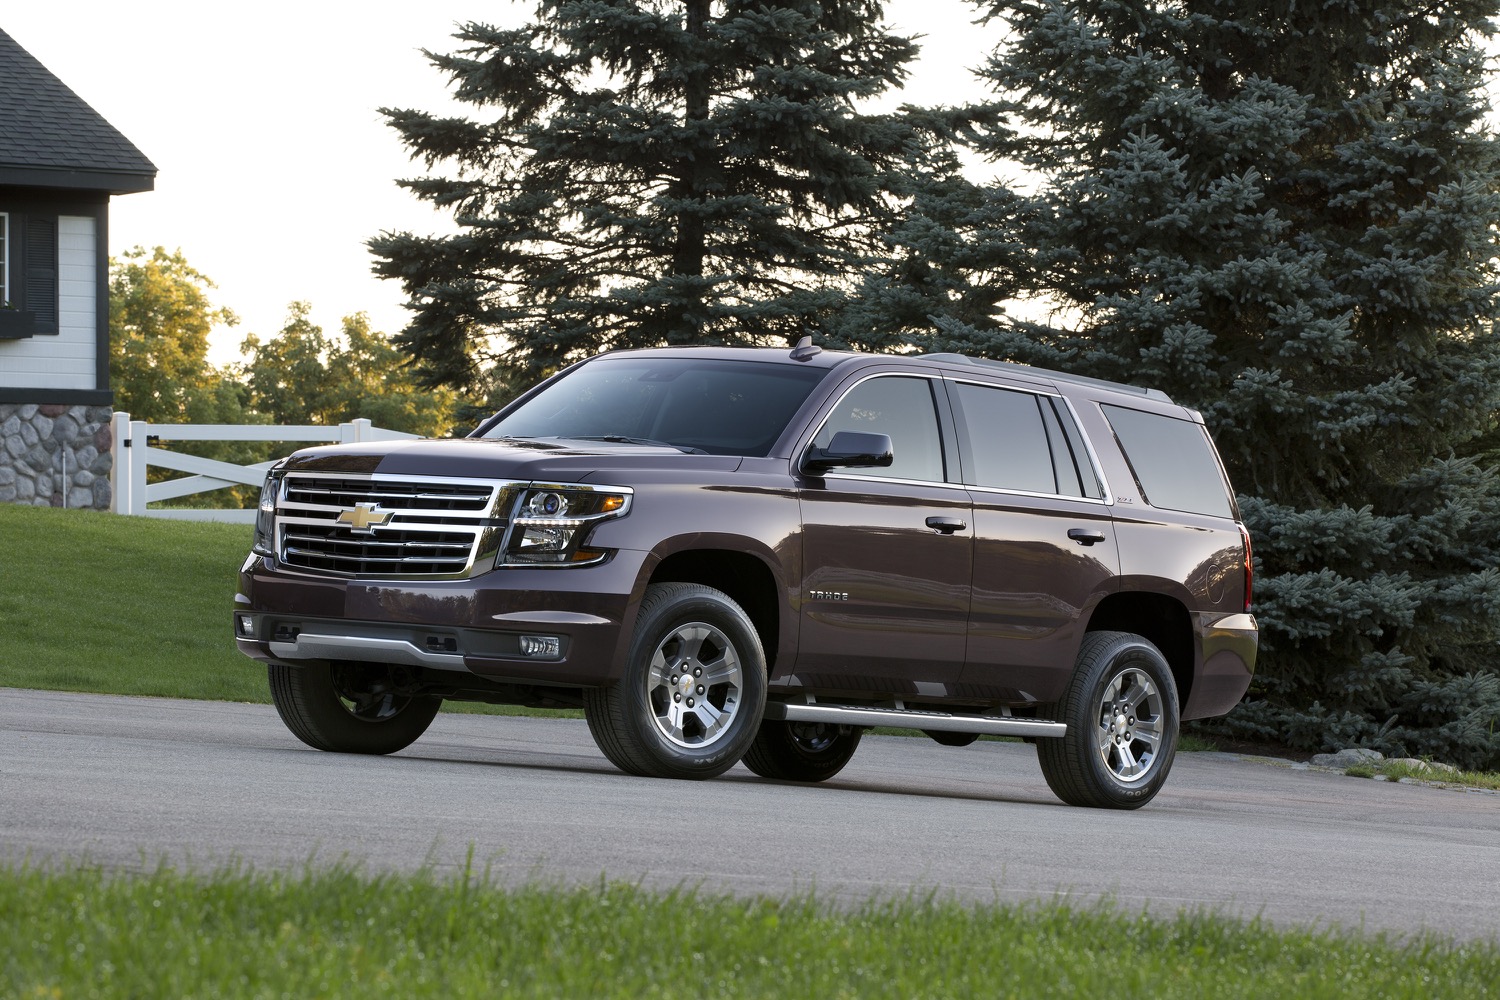 2016 Chevy Tahoe Info, Specs, Pictures, Wiki | GM Authority